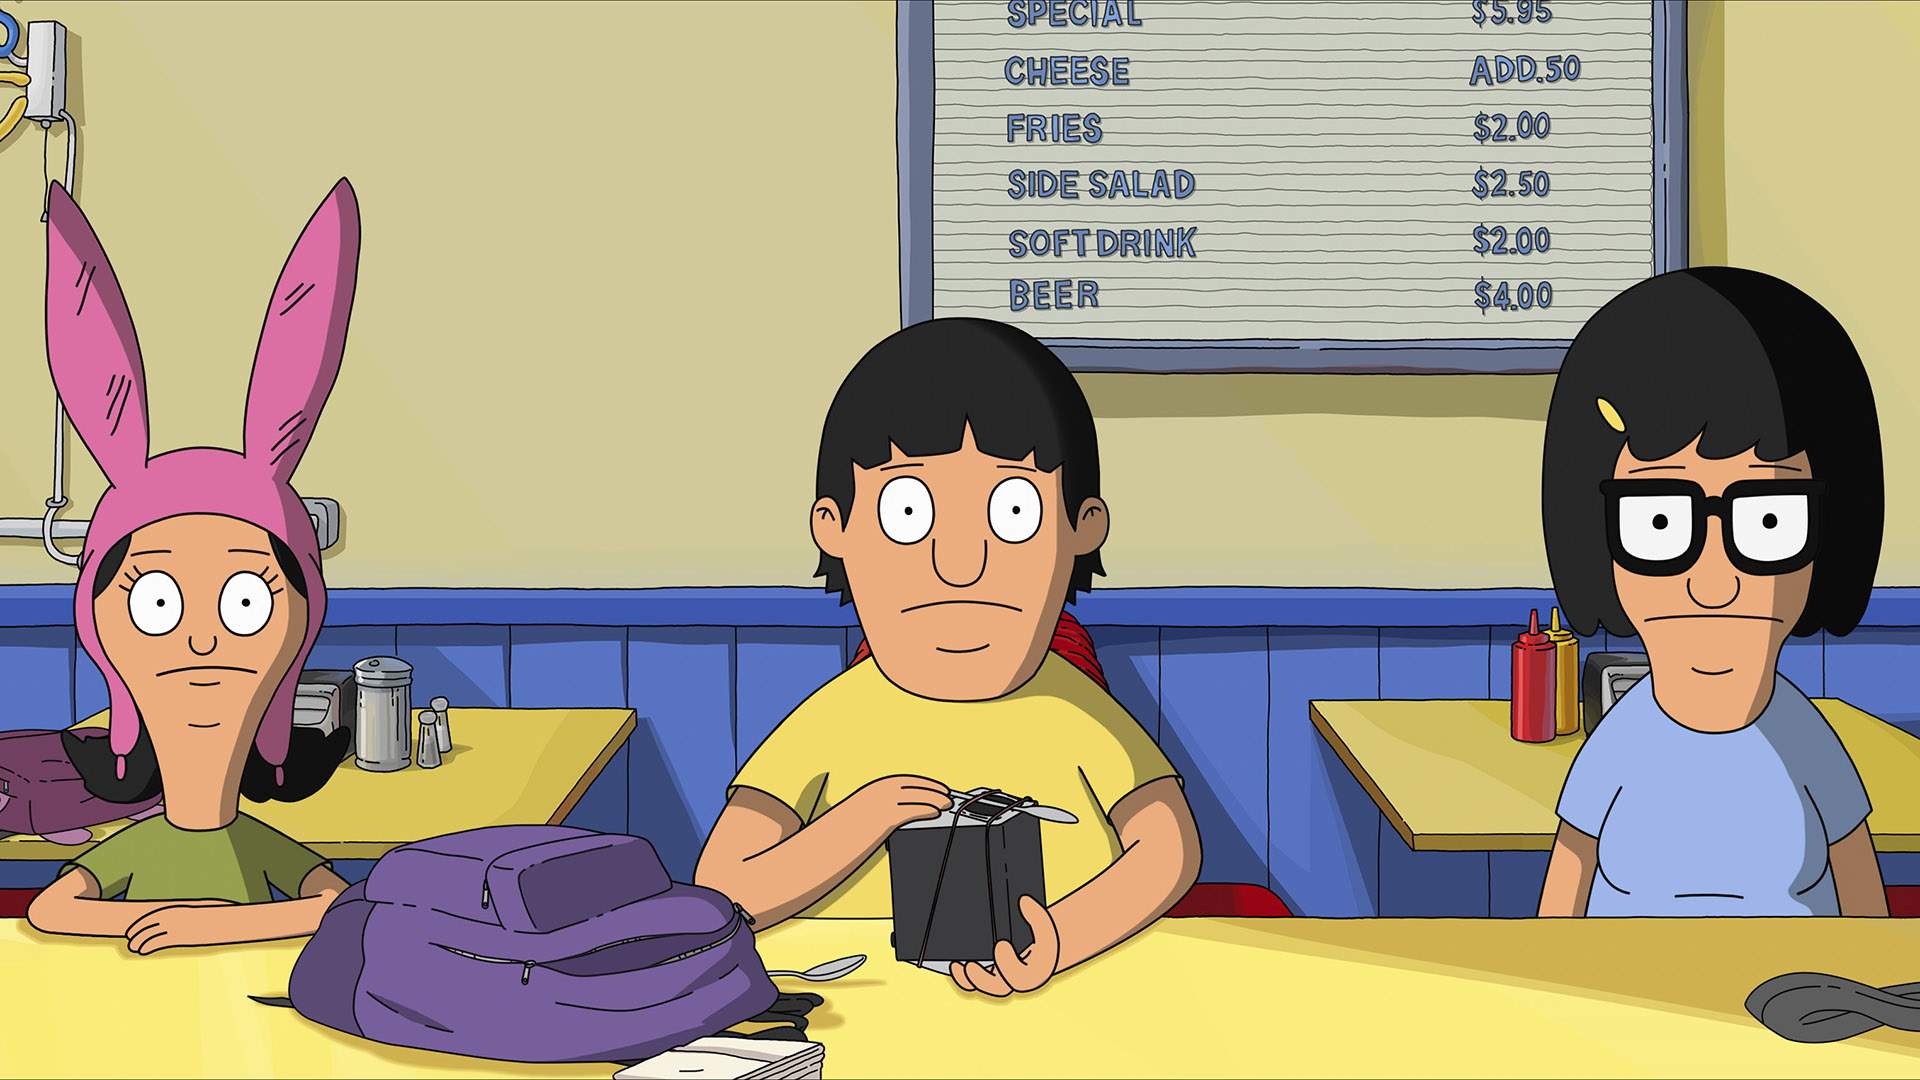 The Latest Trailer for 'The Bob's Burgers Movie' Is Here with Meat, Mayhem and Glorious Burg Puns